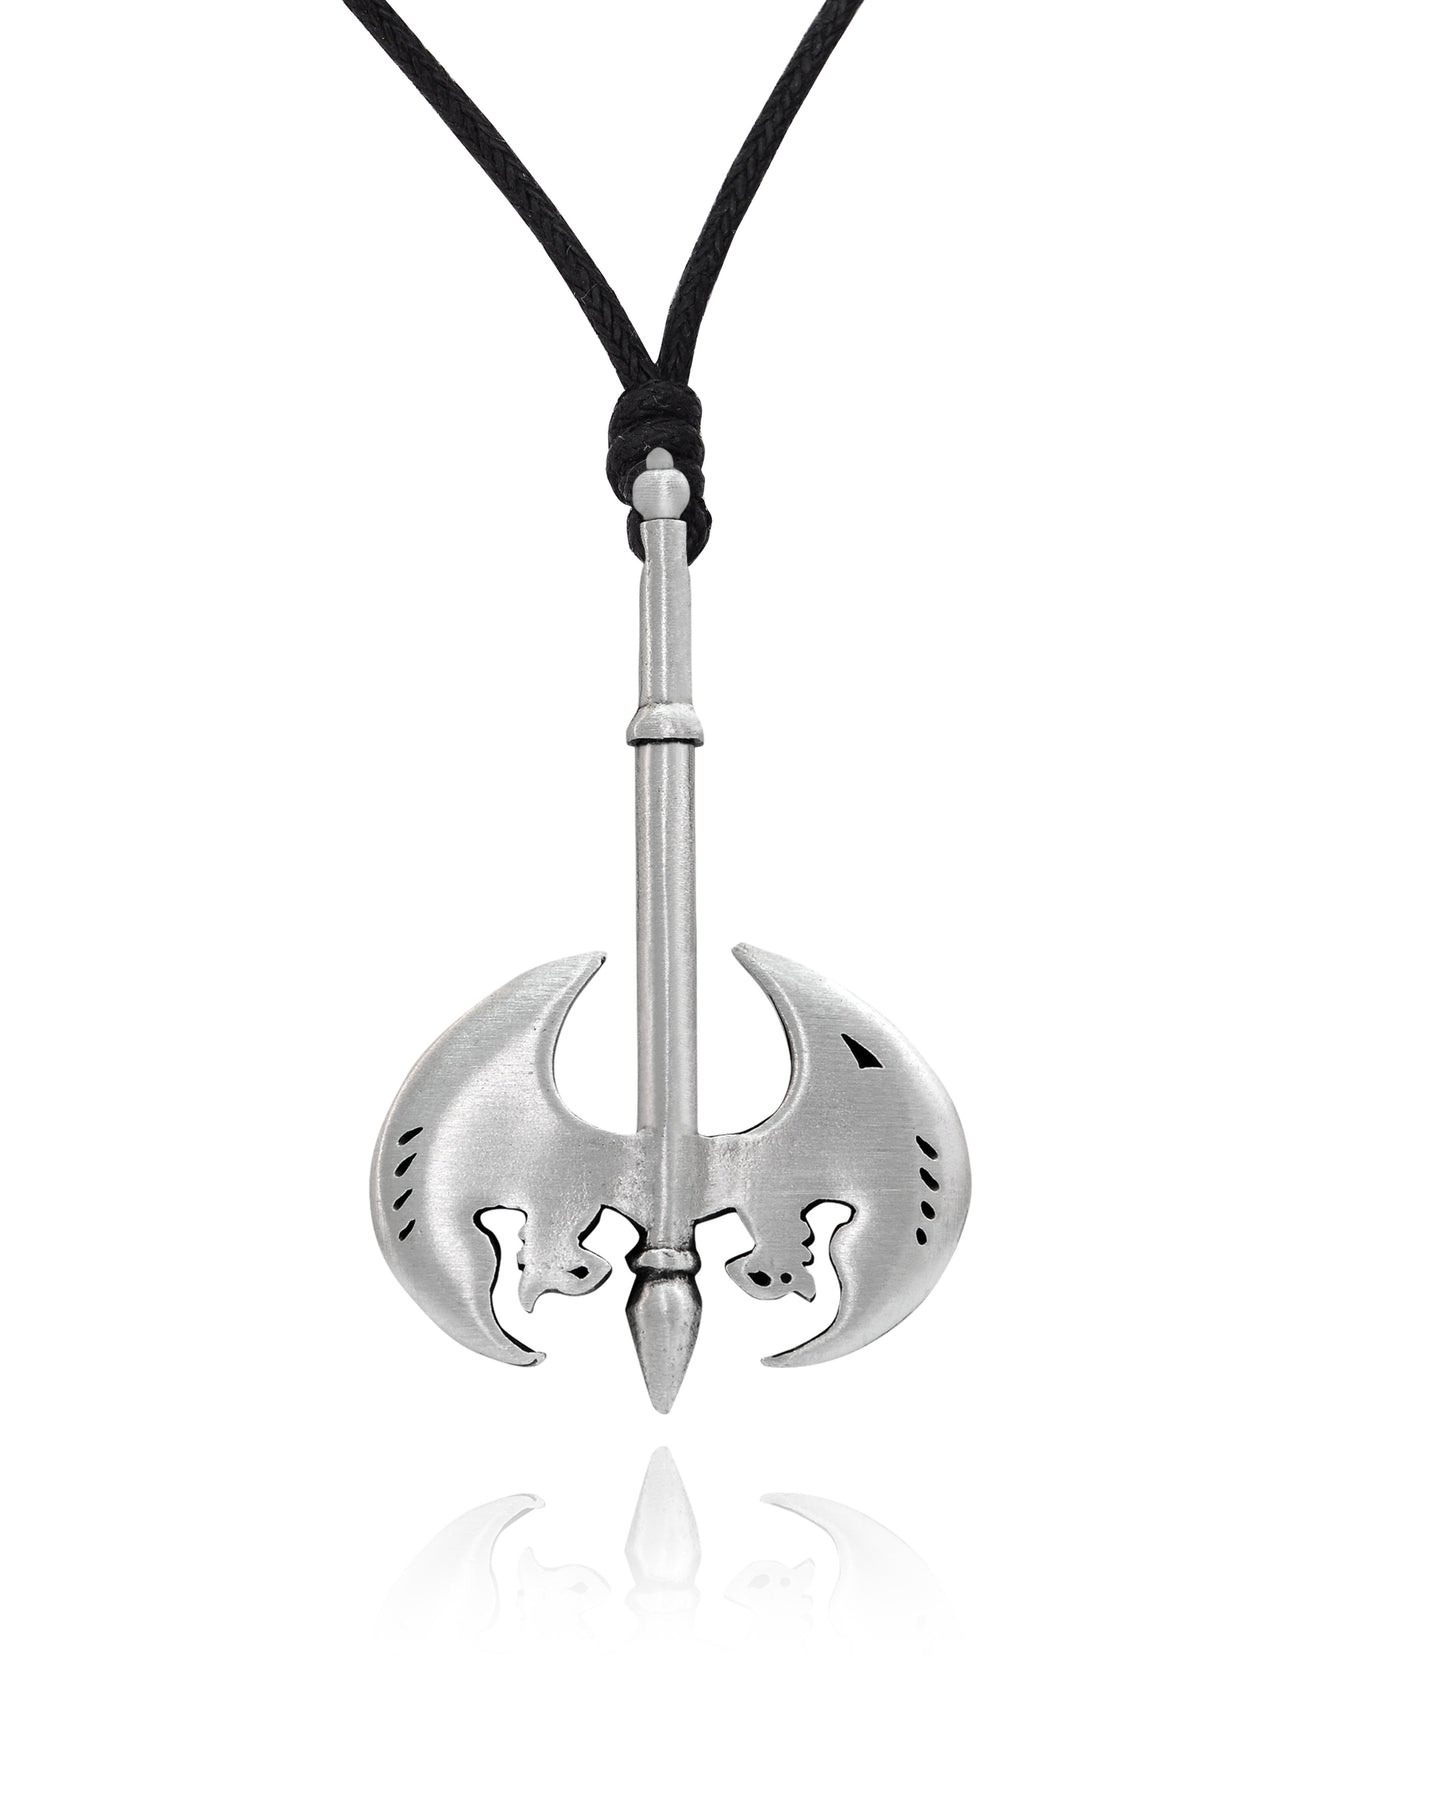 Unique Battle Axe Silver Pewter Gold Brass Charm Necklace Pendant Jewelry